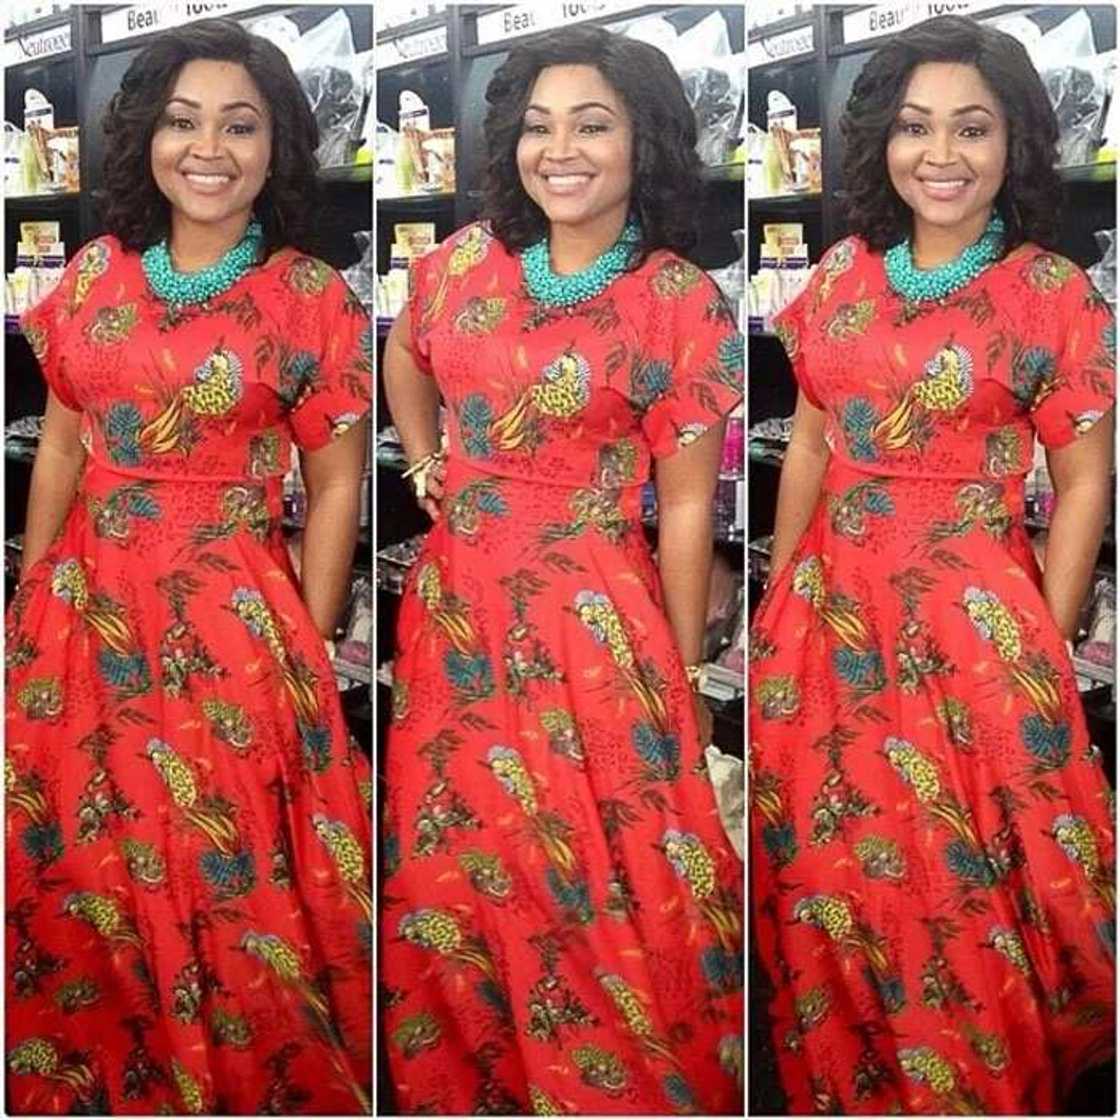 Mercy Aigbe styles